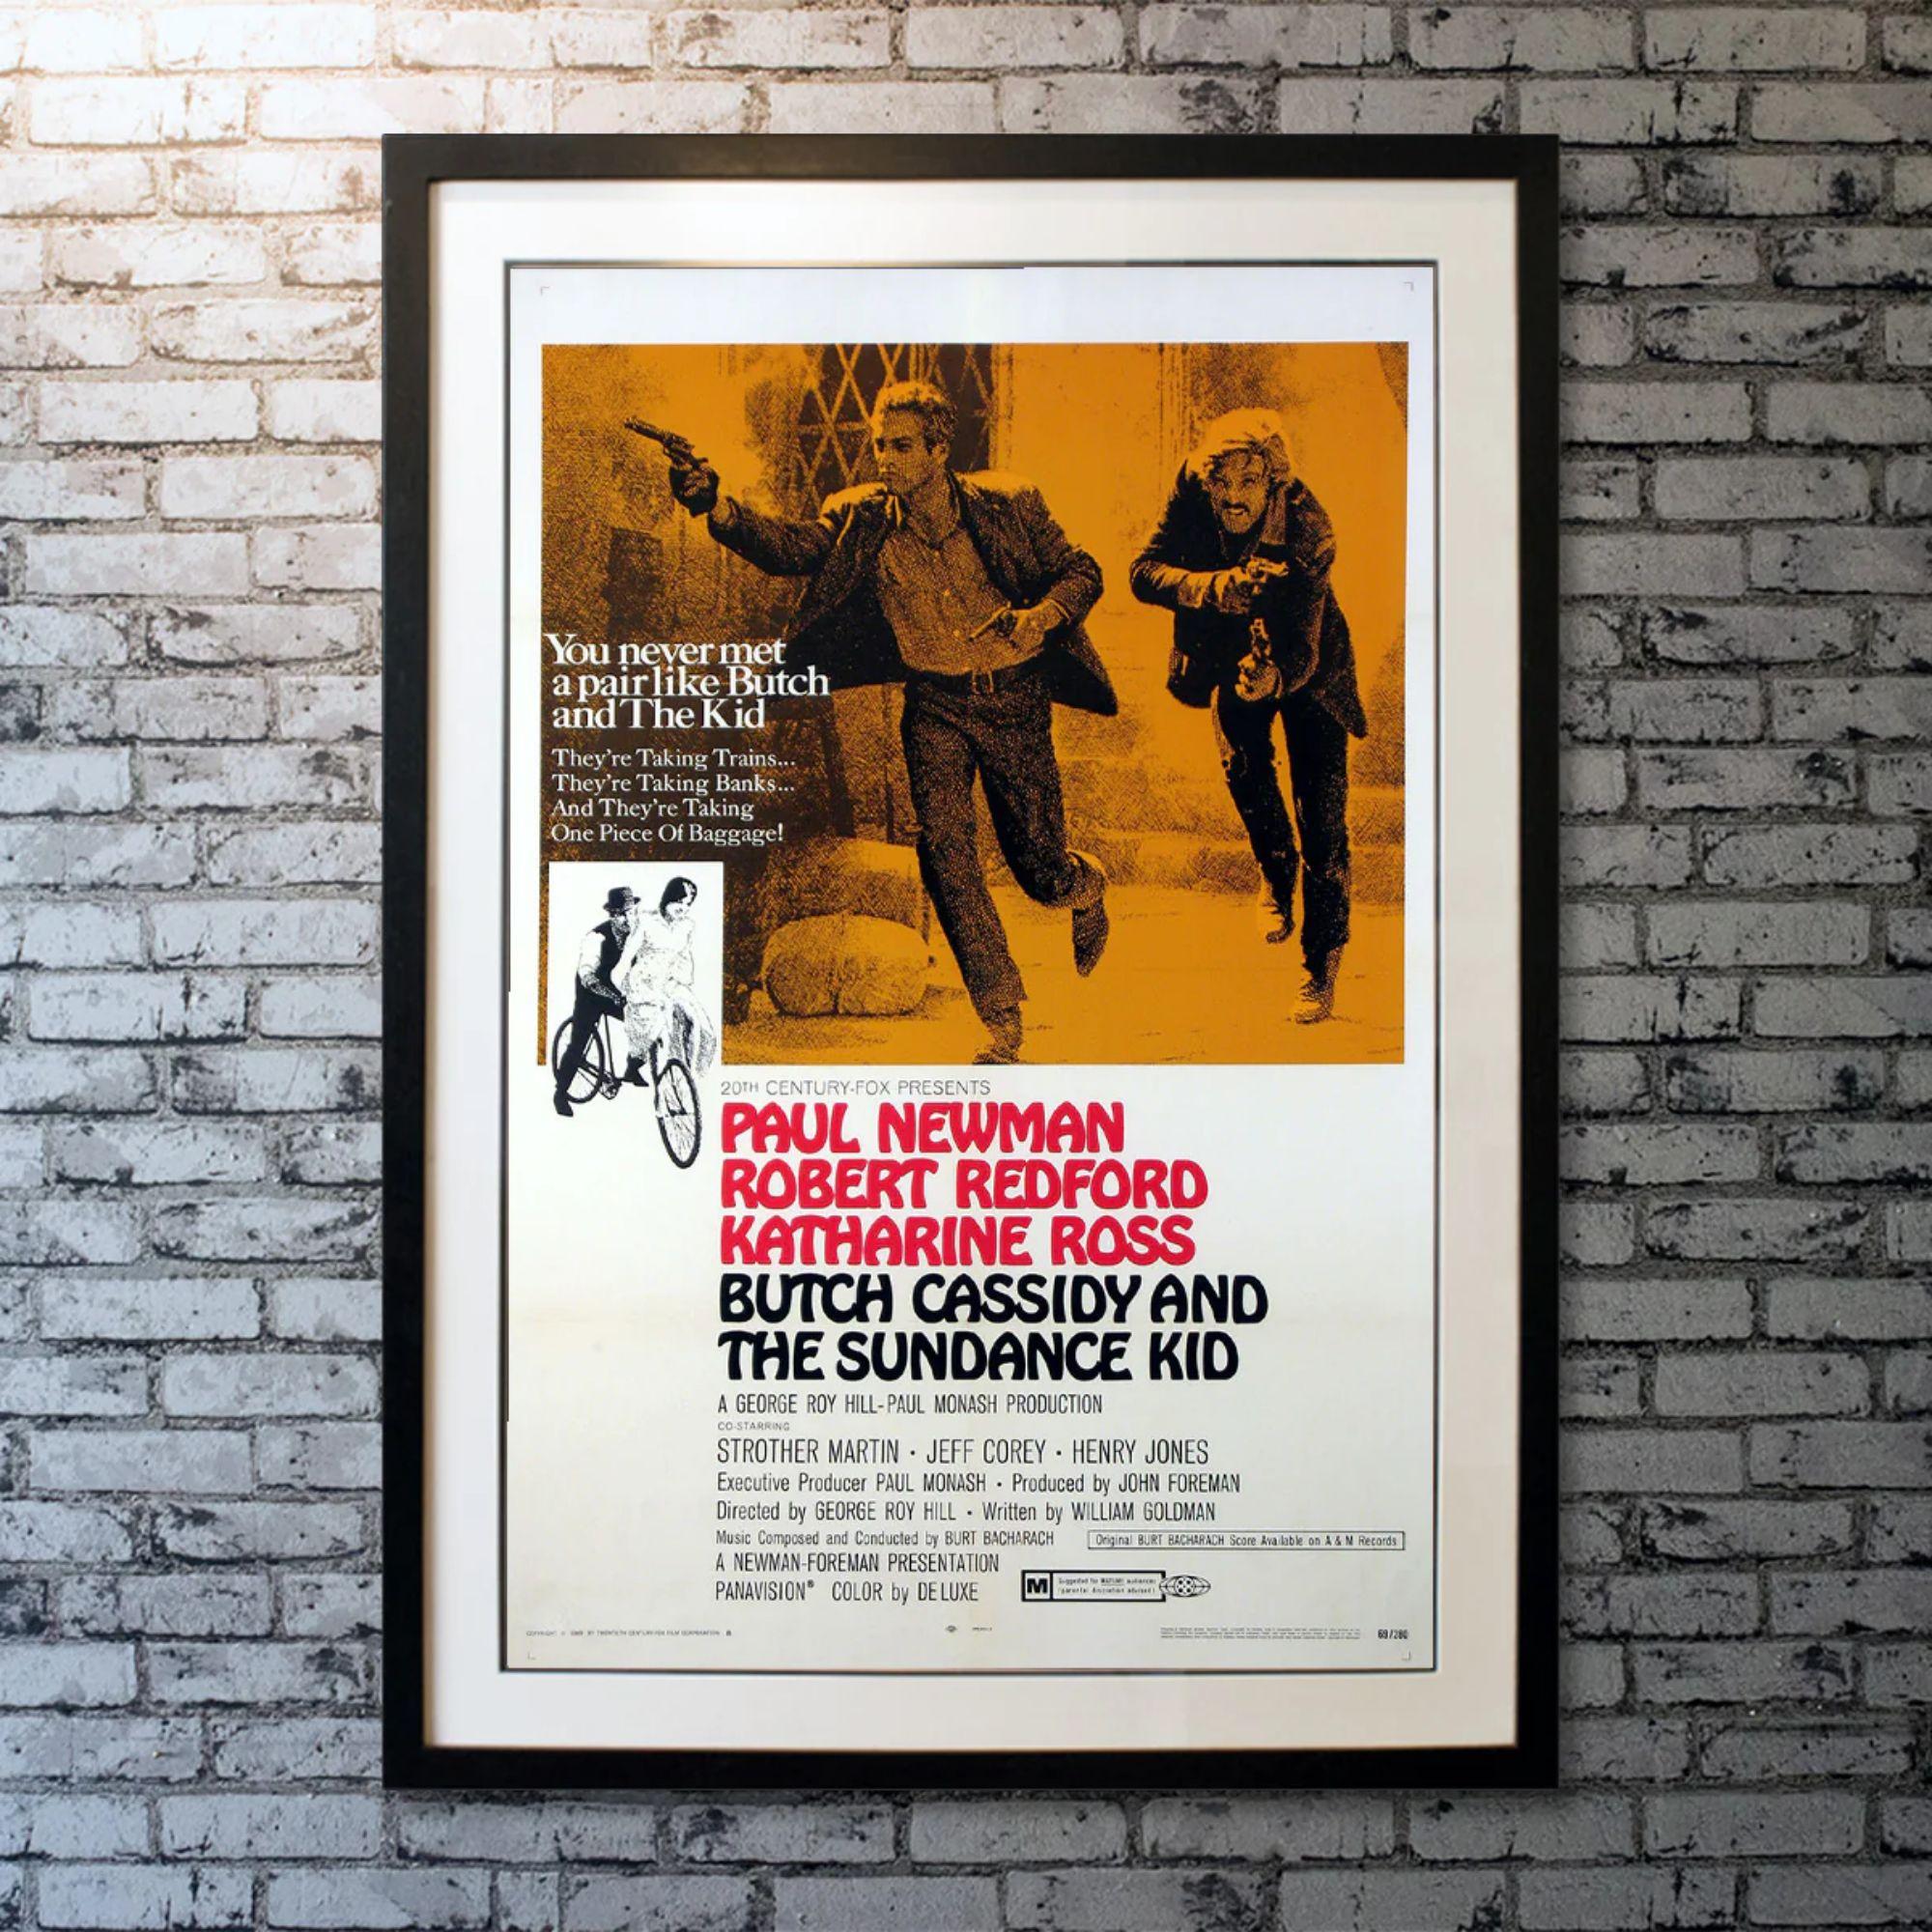 Butch Cassidy And The Sundance Kid, Unframed Poster, 1969

Original One Sheet (27 X 41 Inches). Wyoming, early 1900s. Butch Cassidy and The Sundance Kid are the leaders of a band of outlaws. After a train robbery goes wrong they find themselves on